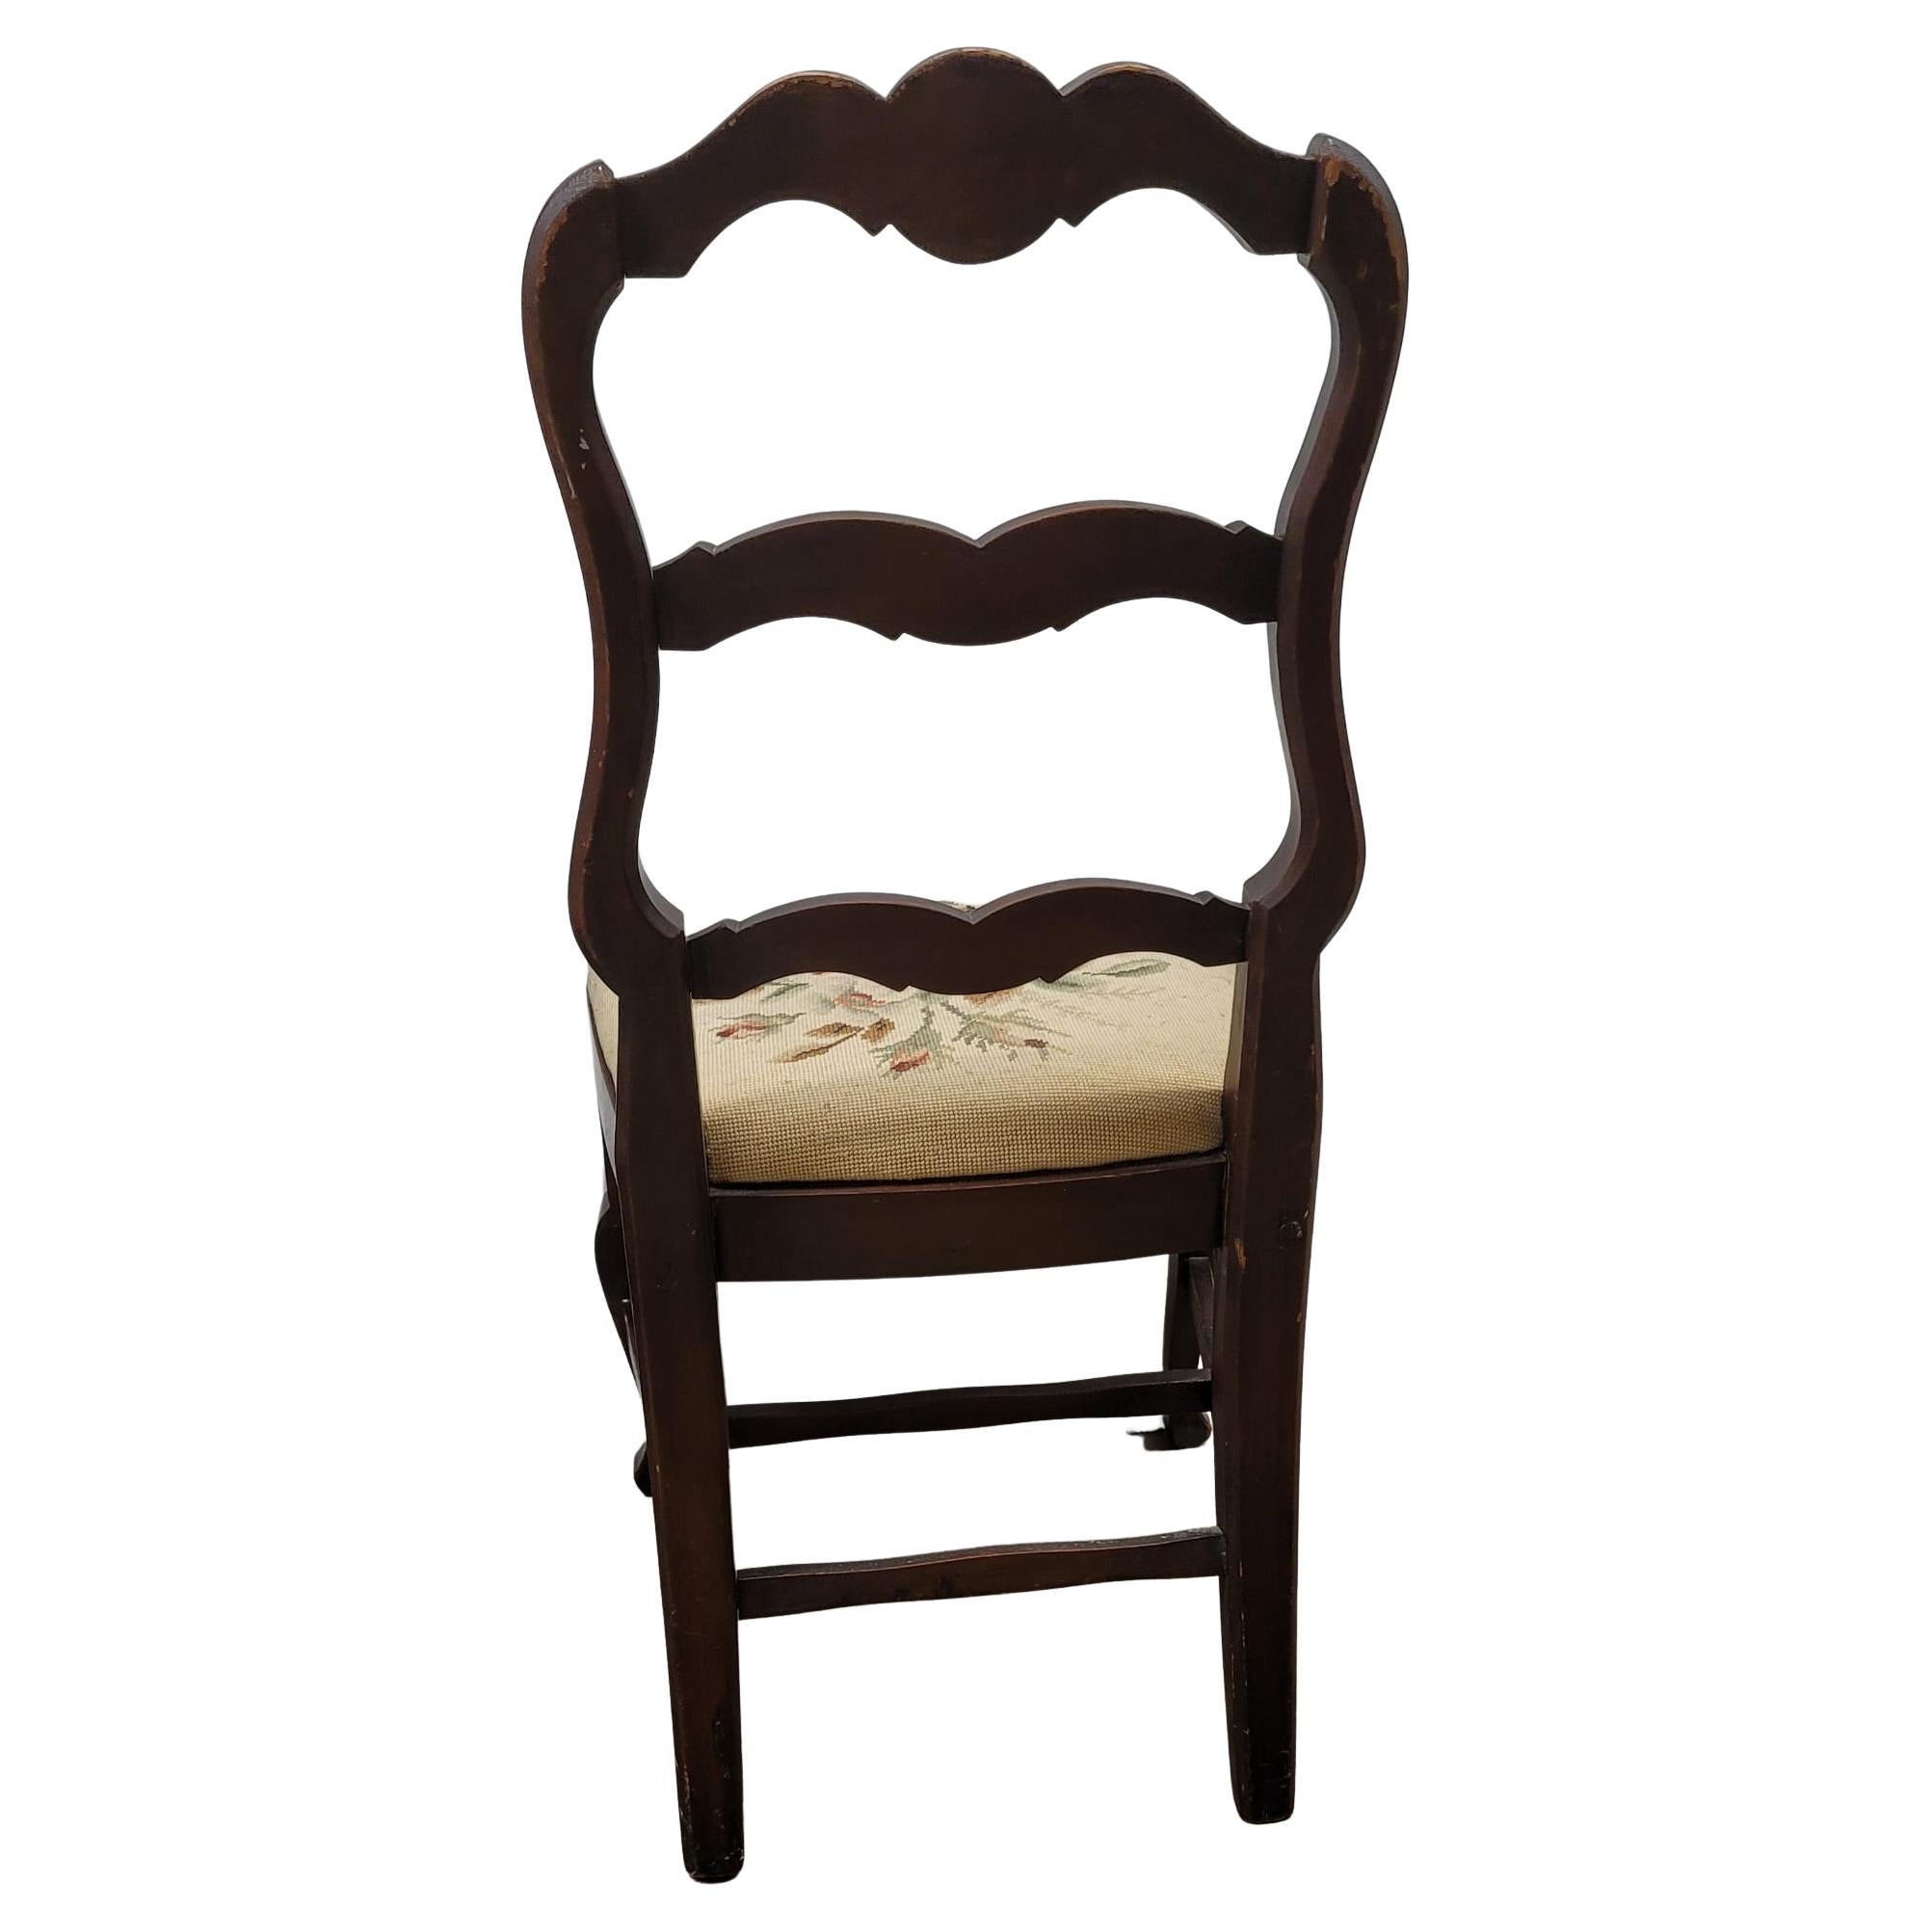 20th Century Reischman Furniture Ladder Back Mahogany Needlepoint Upholstered Chair For Sale